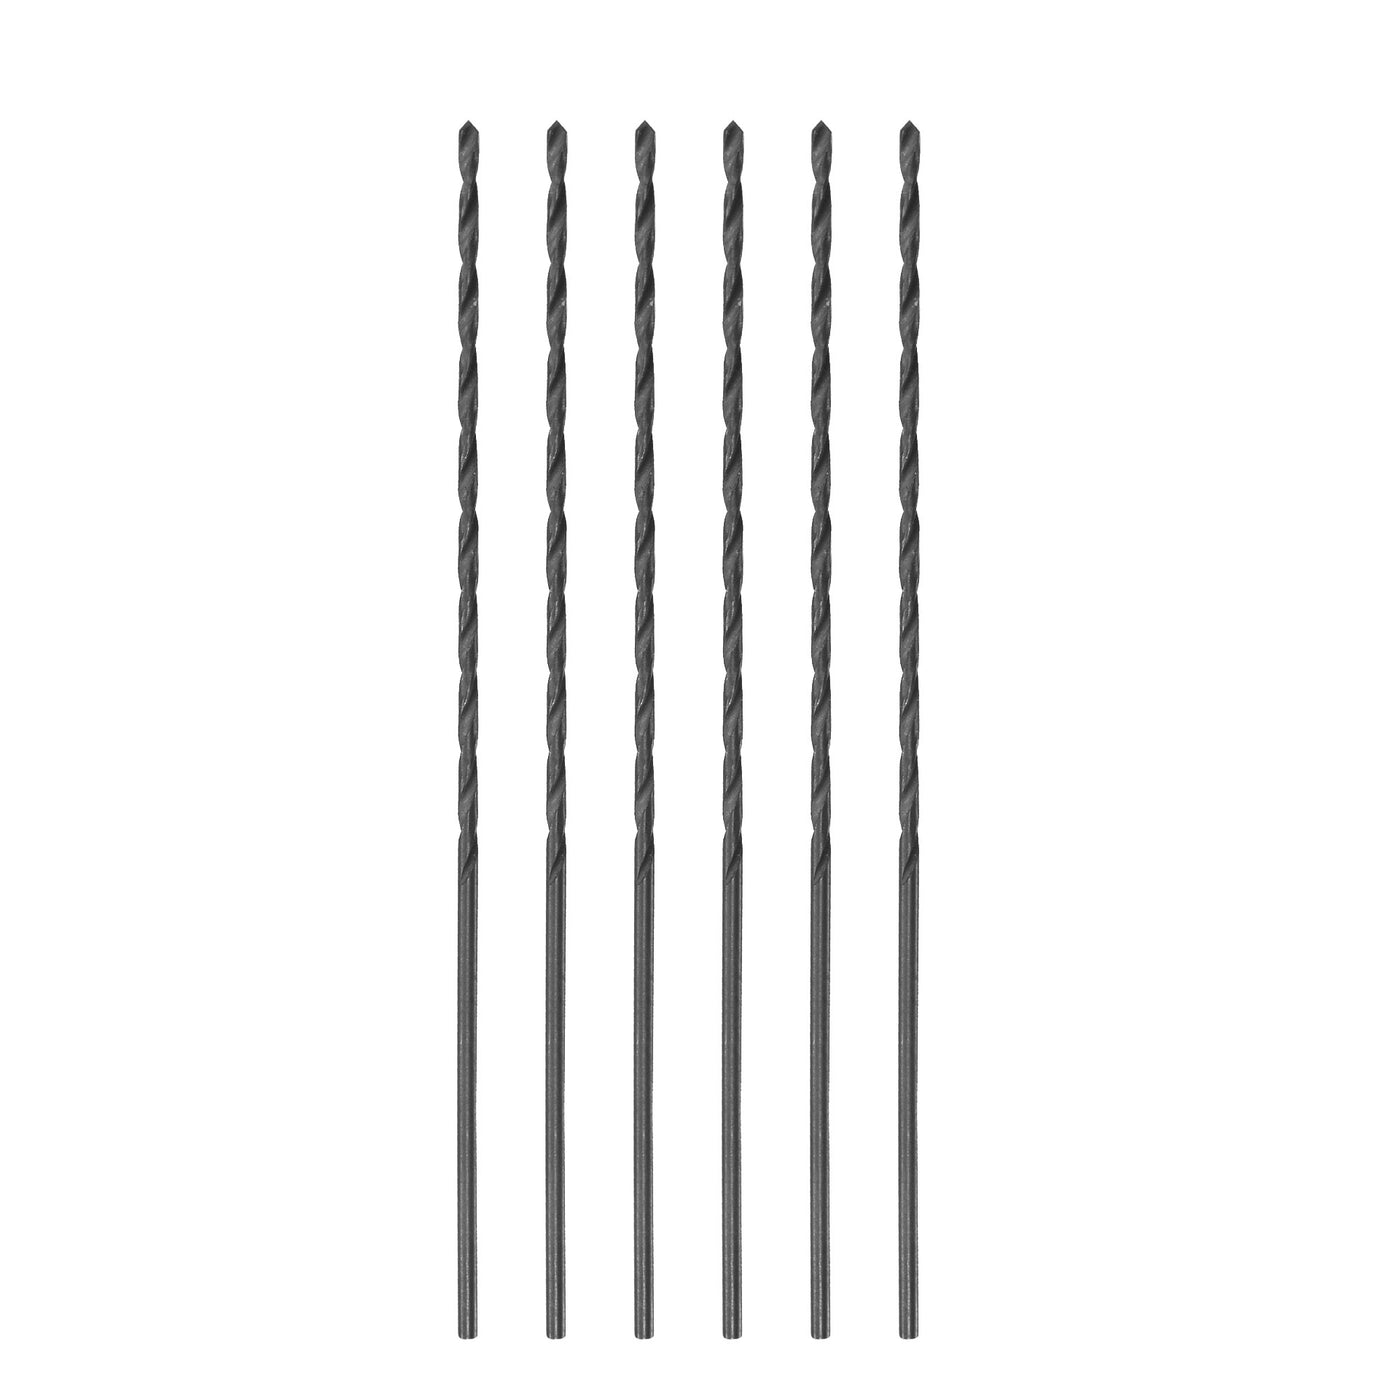 uxcell Uxcell High Speed Steel Lengthen Twist Drill Bit 1mm Fully Ground Black Oxide 6Pcs